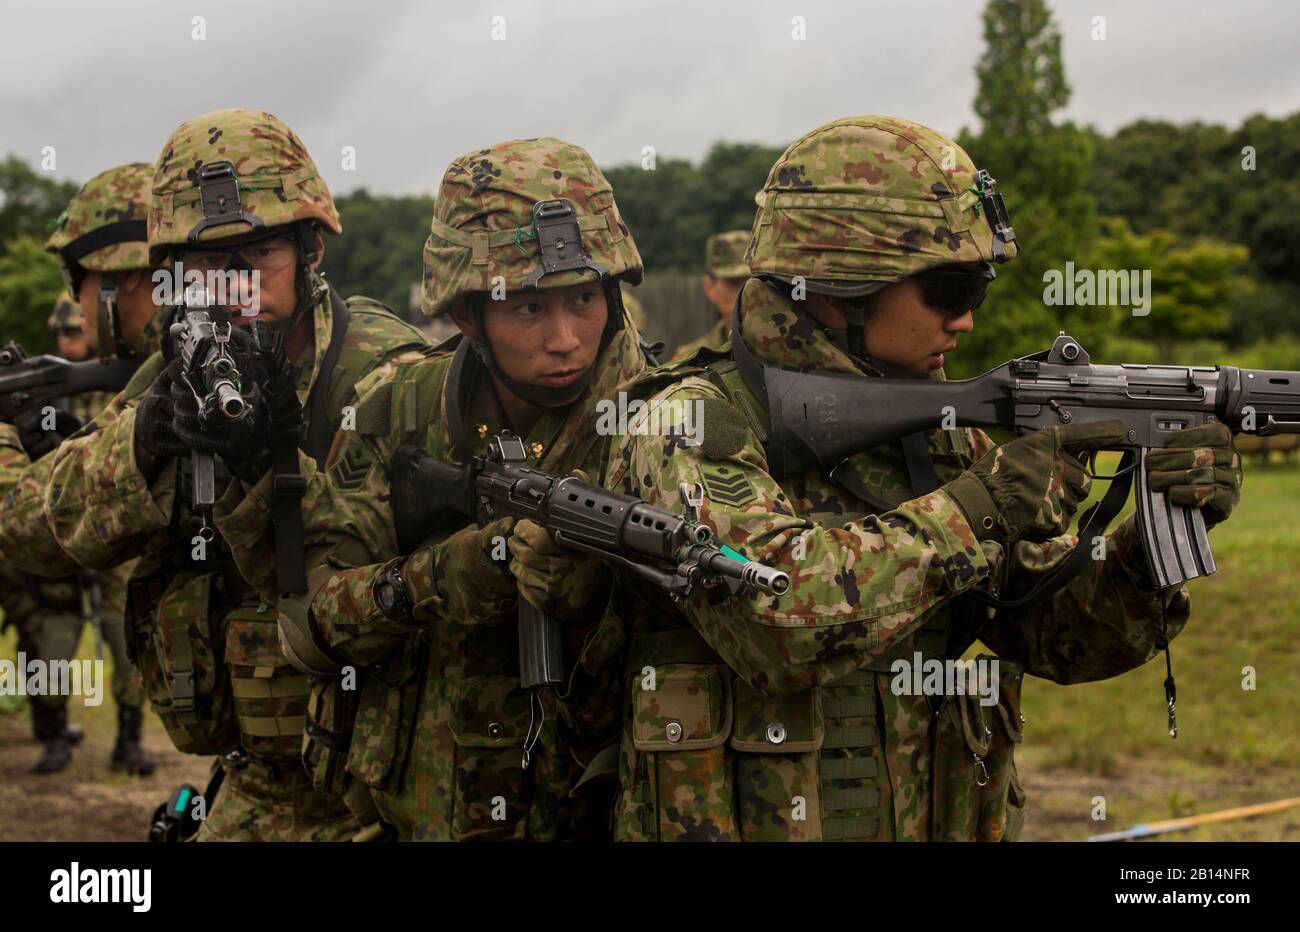 Japan Ground Self-Defense Force soldiers prepare to enter a building during  military operations on urbanized terrain, Aug. 16, 2017, in Hokudaien, Japan during Northern Viper 17. 'MOUT simulates being in an urban combat environment. This gives the military members more accurate training in what they could be dealing with in the future,' said Staff Sgt. Yahshua Ervin. Northern Viper is a combined-joint exercise designed to enhance regional cooperation between the U.S. and Japan. Marines with 1st Battalion, 3rd Regiment, 3rd Marine Division are forward deployed to Japan as part of the Unit Depl Stock Photo